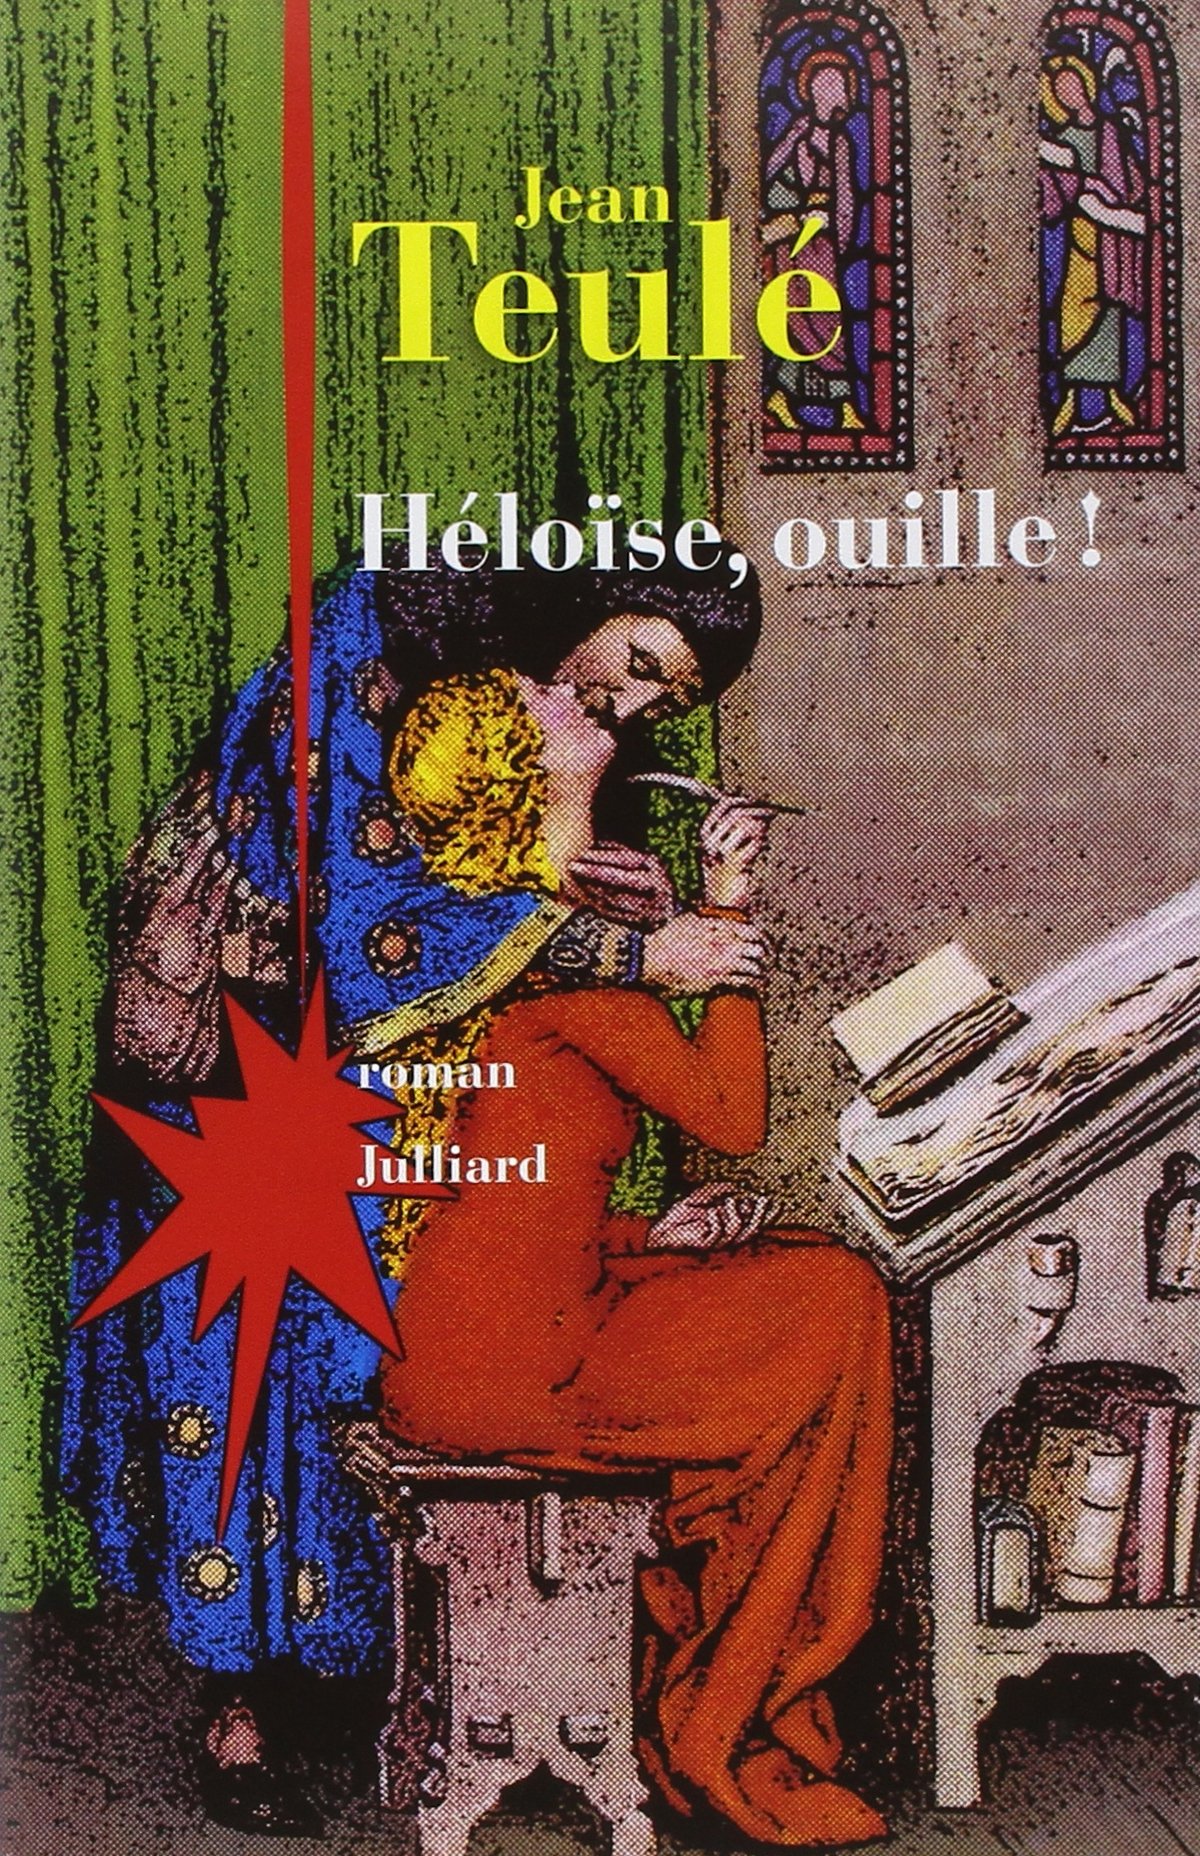 Heloise, ouille!